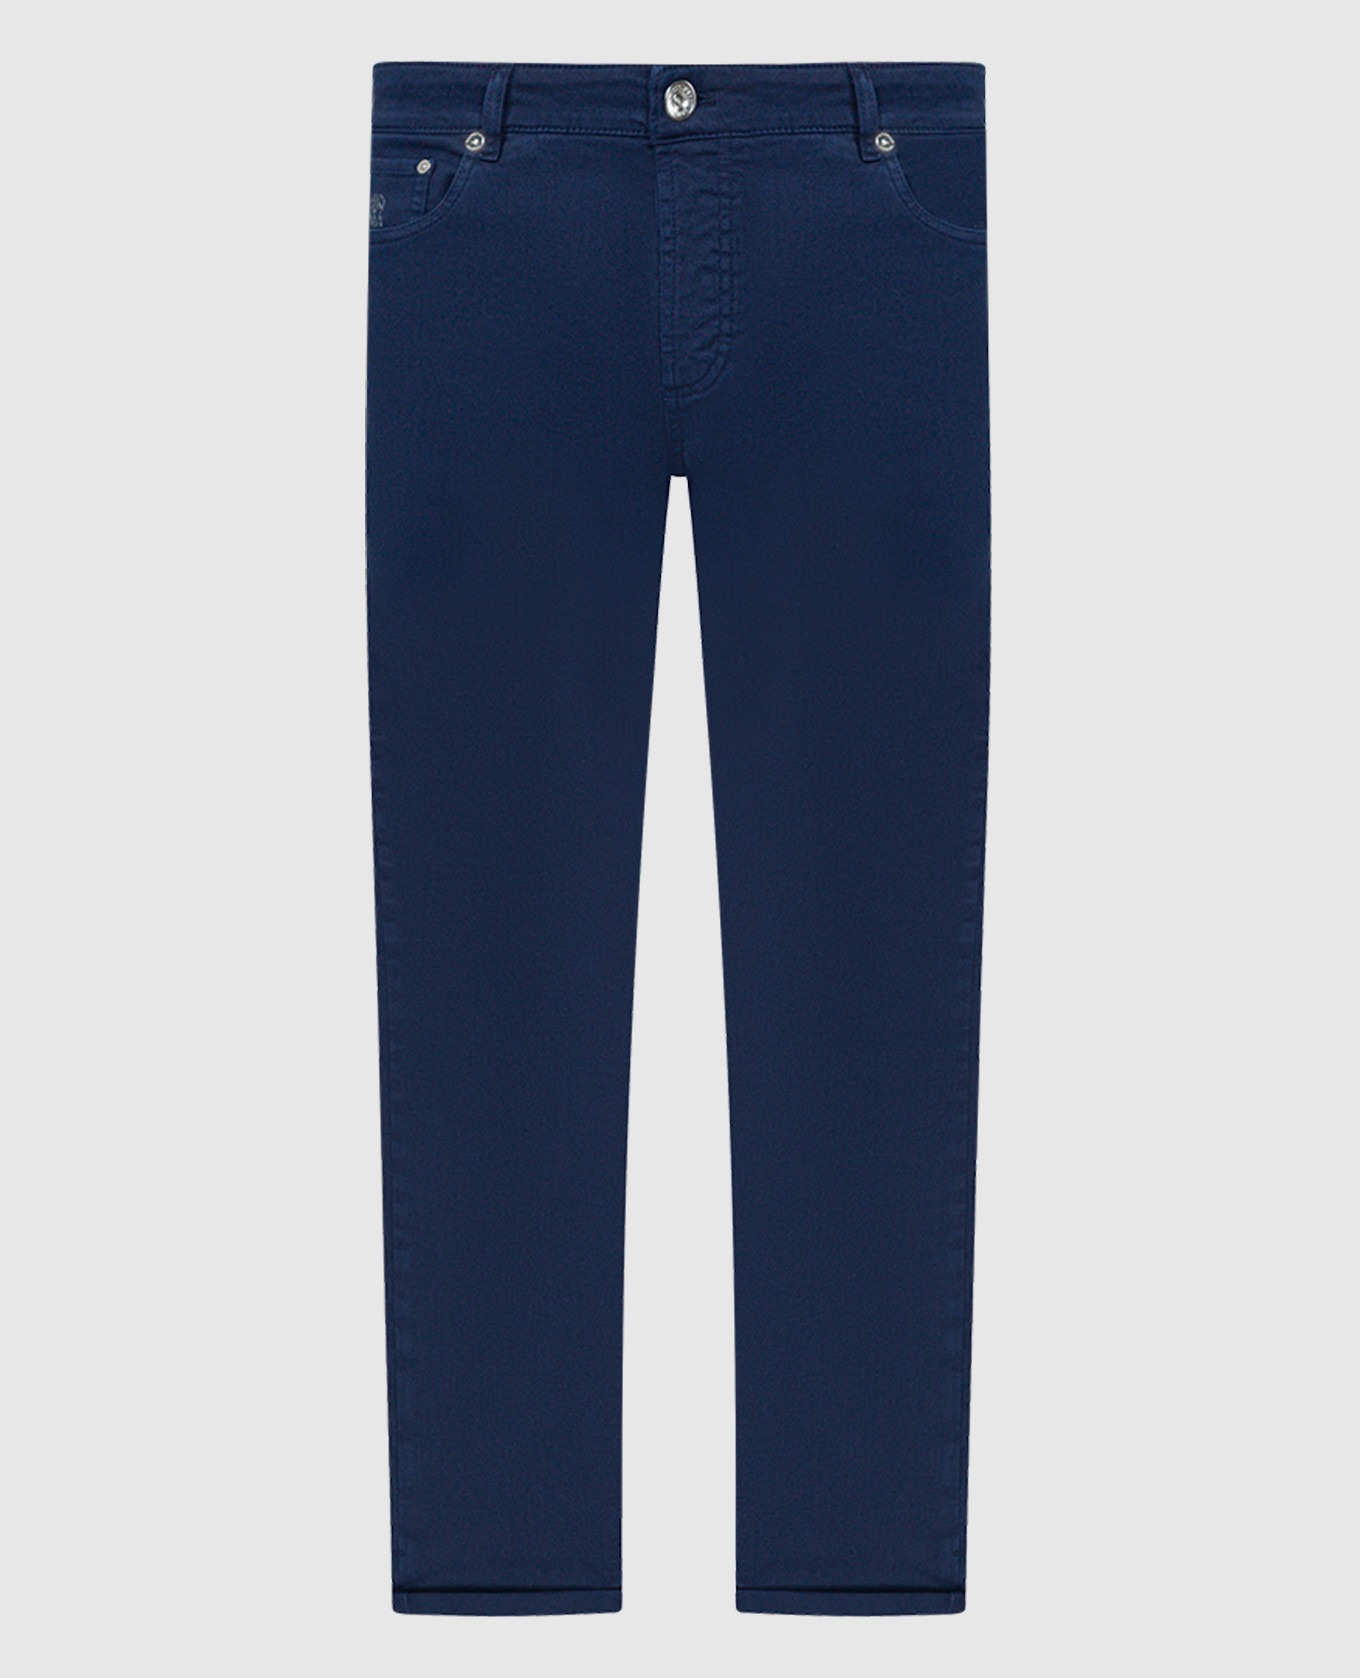 Blue tapered pants with logo patch